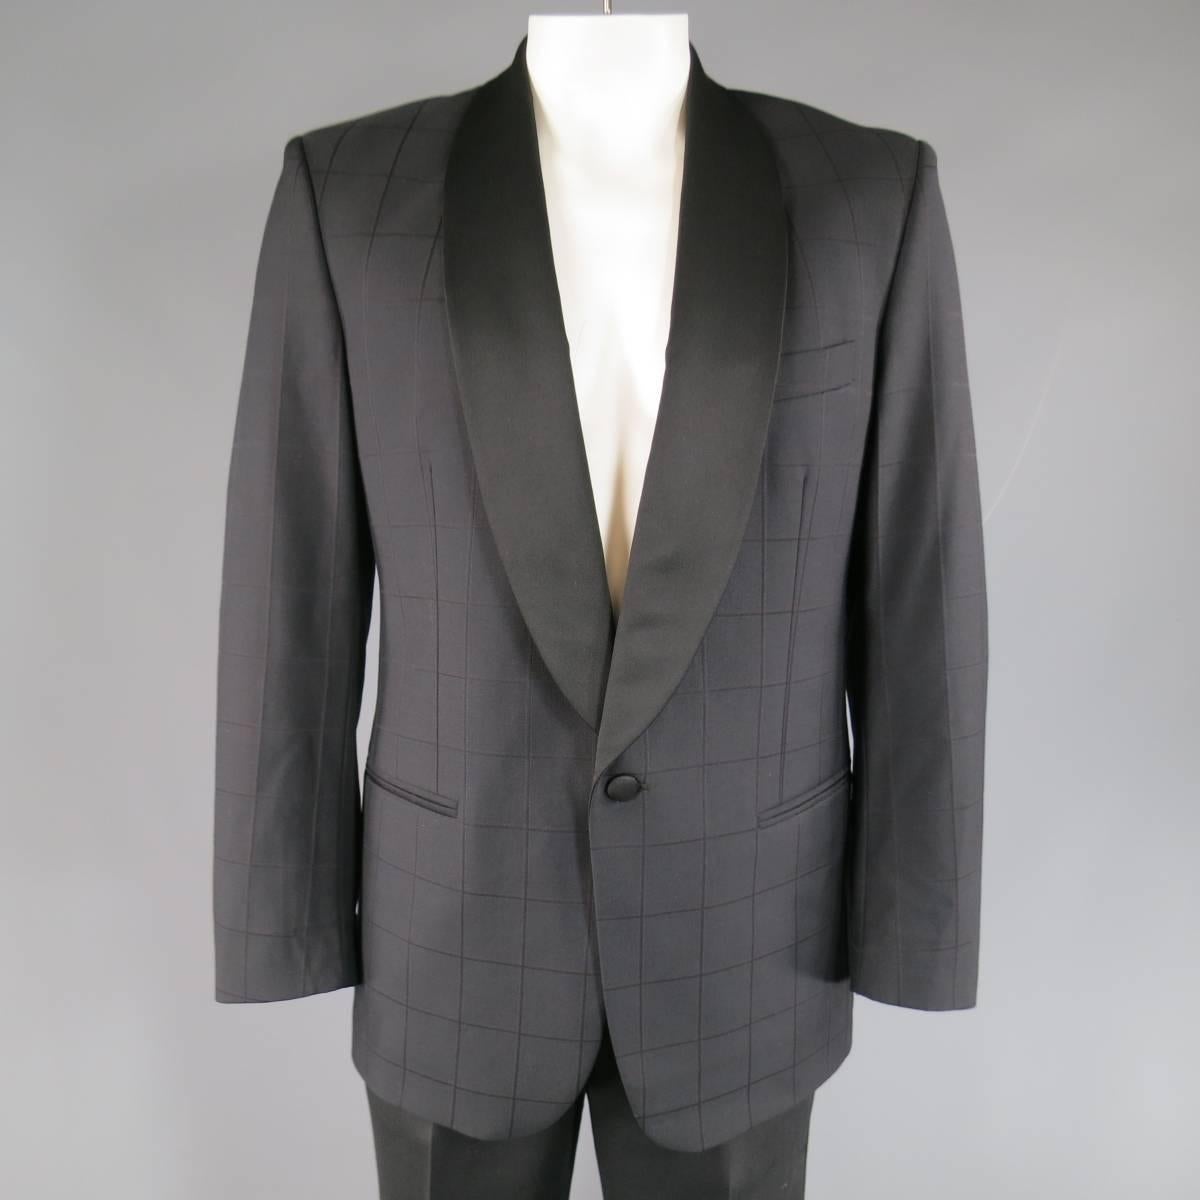 Vintage MISSONI UOMO tuxedo in black windowpane print wool with accents of red & gray includes a single button dinner jacket with black satin shawl collar and solid black pleated tuxedo stripe trousers. Made in Italy.
 
Excellent Pre-Owned